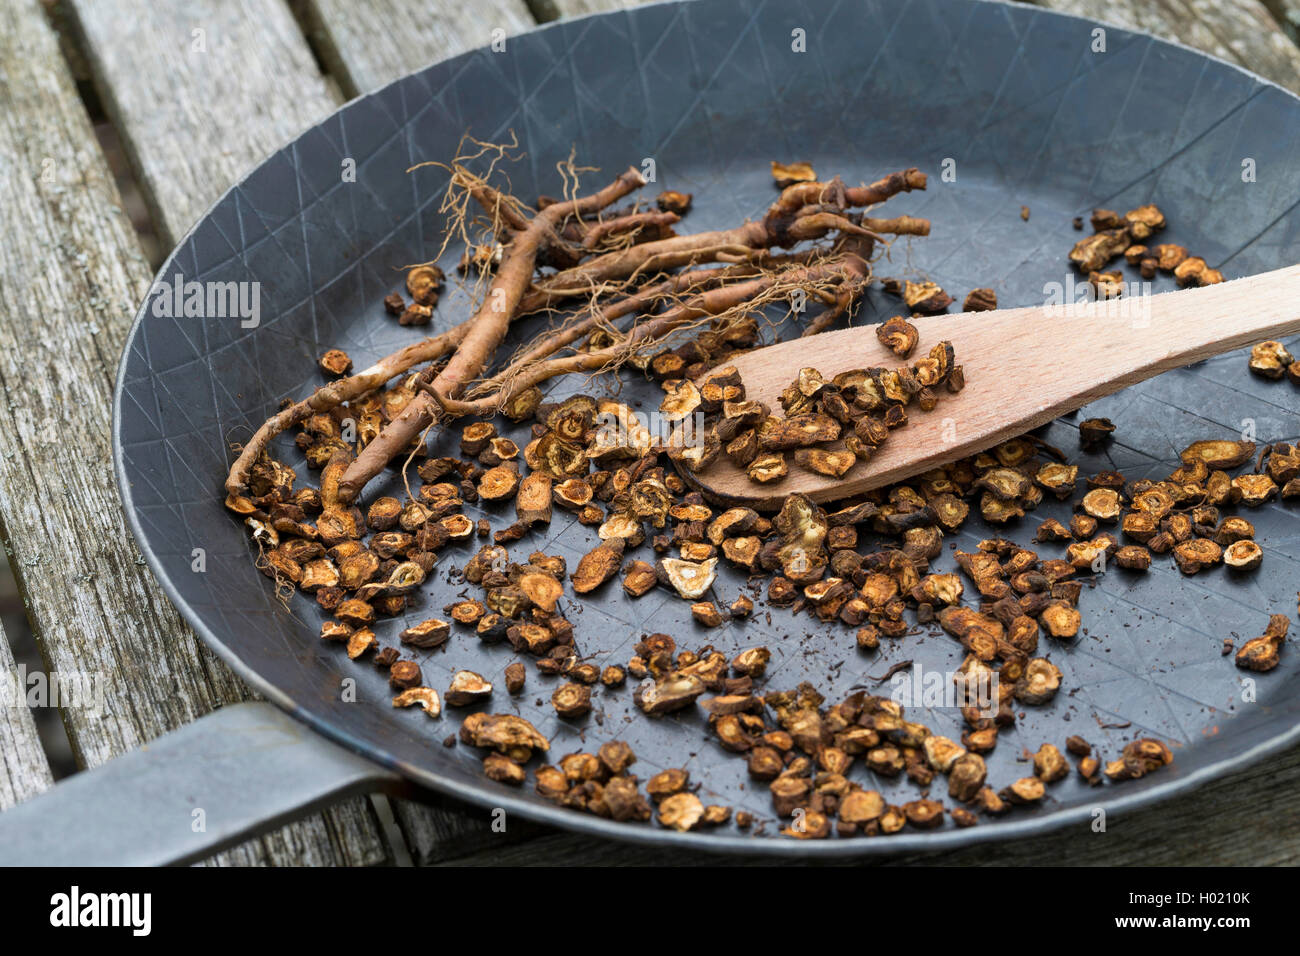 common dandelion (Taraxacum officinale), cut in slice roots are roasted, Germany Stock Photo